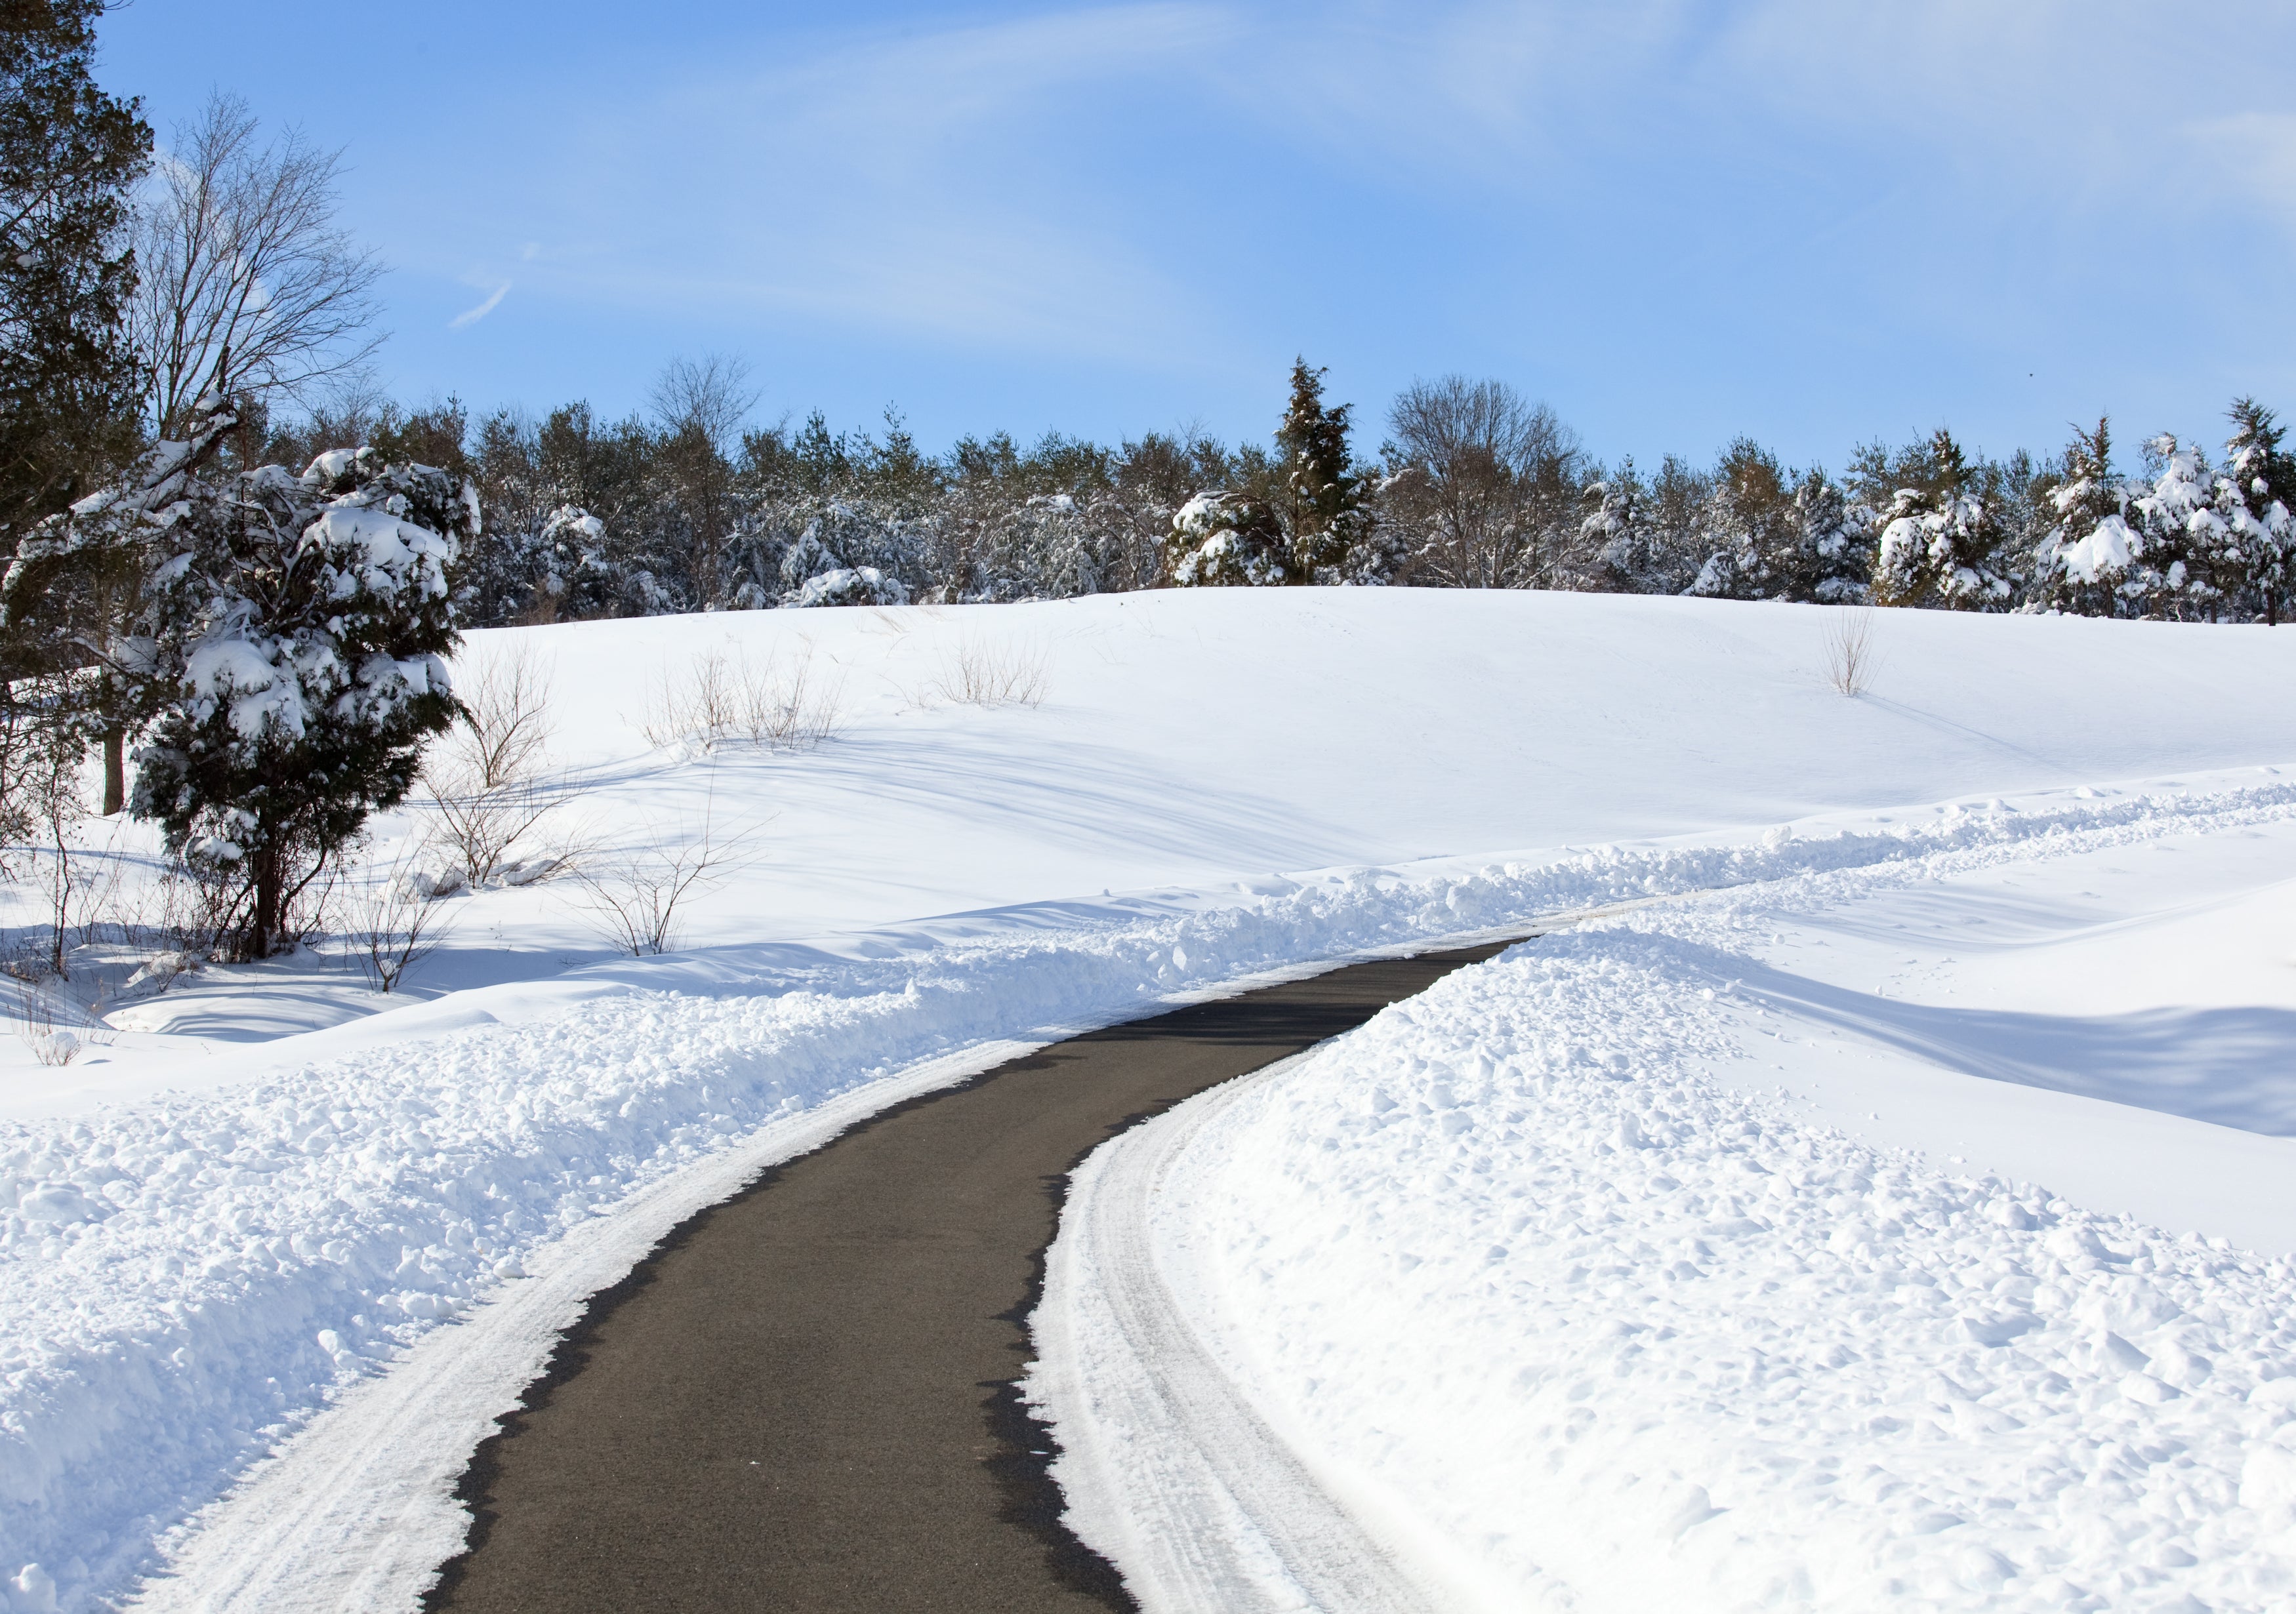 a clear black path is surrounded by snow banks. The scenery around it is more snow and pine trees.